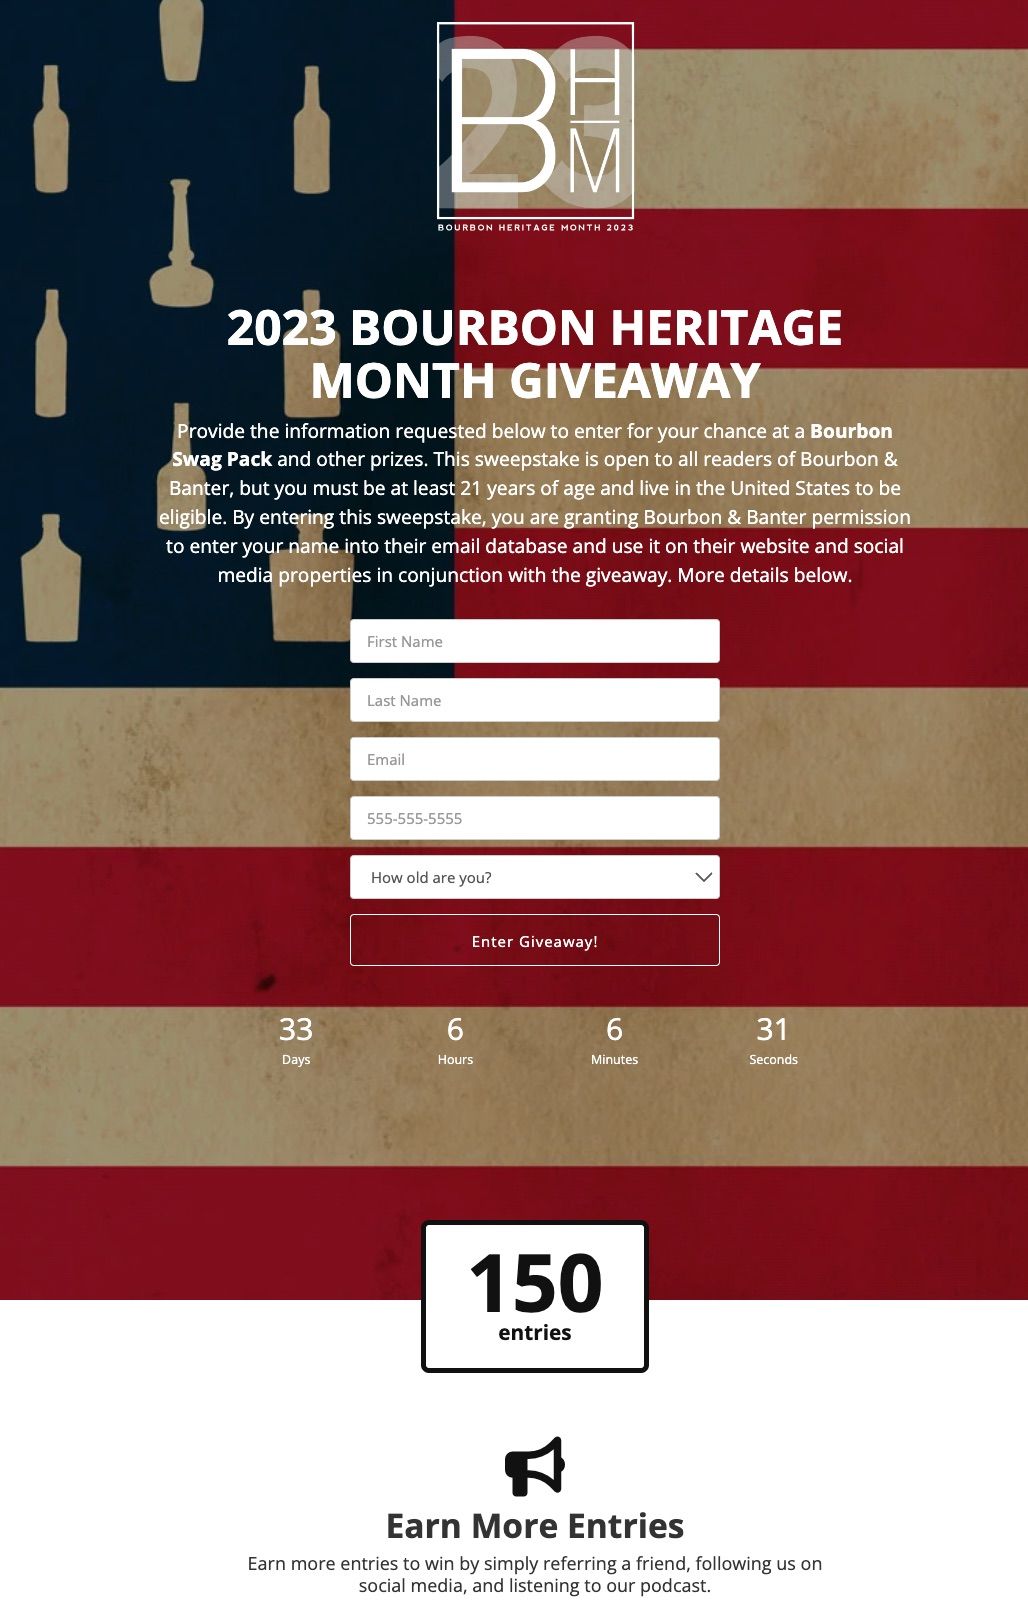 Welcome to Bourbon Heritage Month 2023